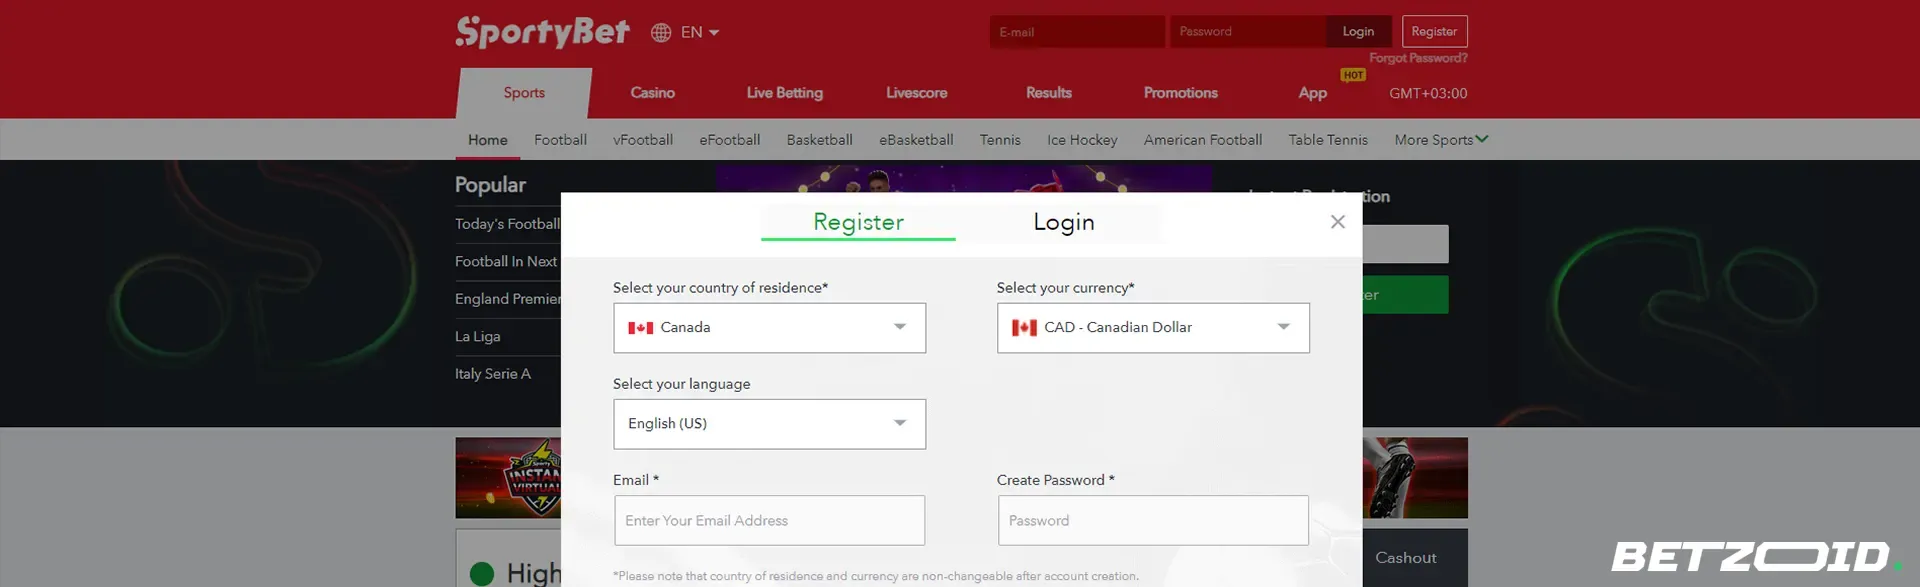 Sportybet registration page in Canada.